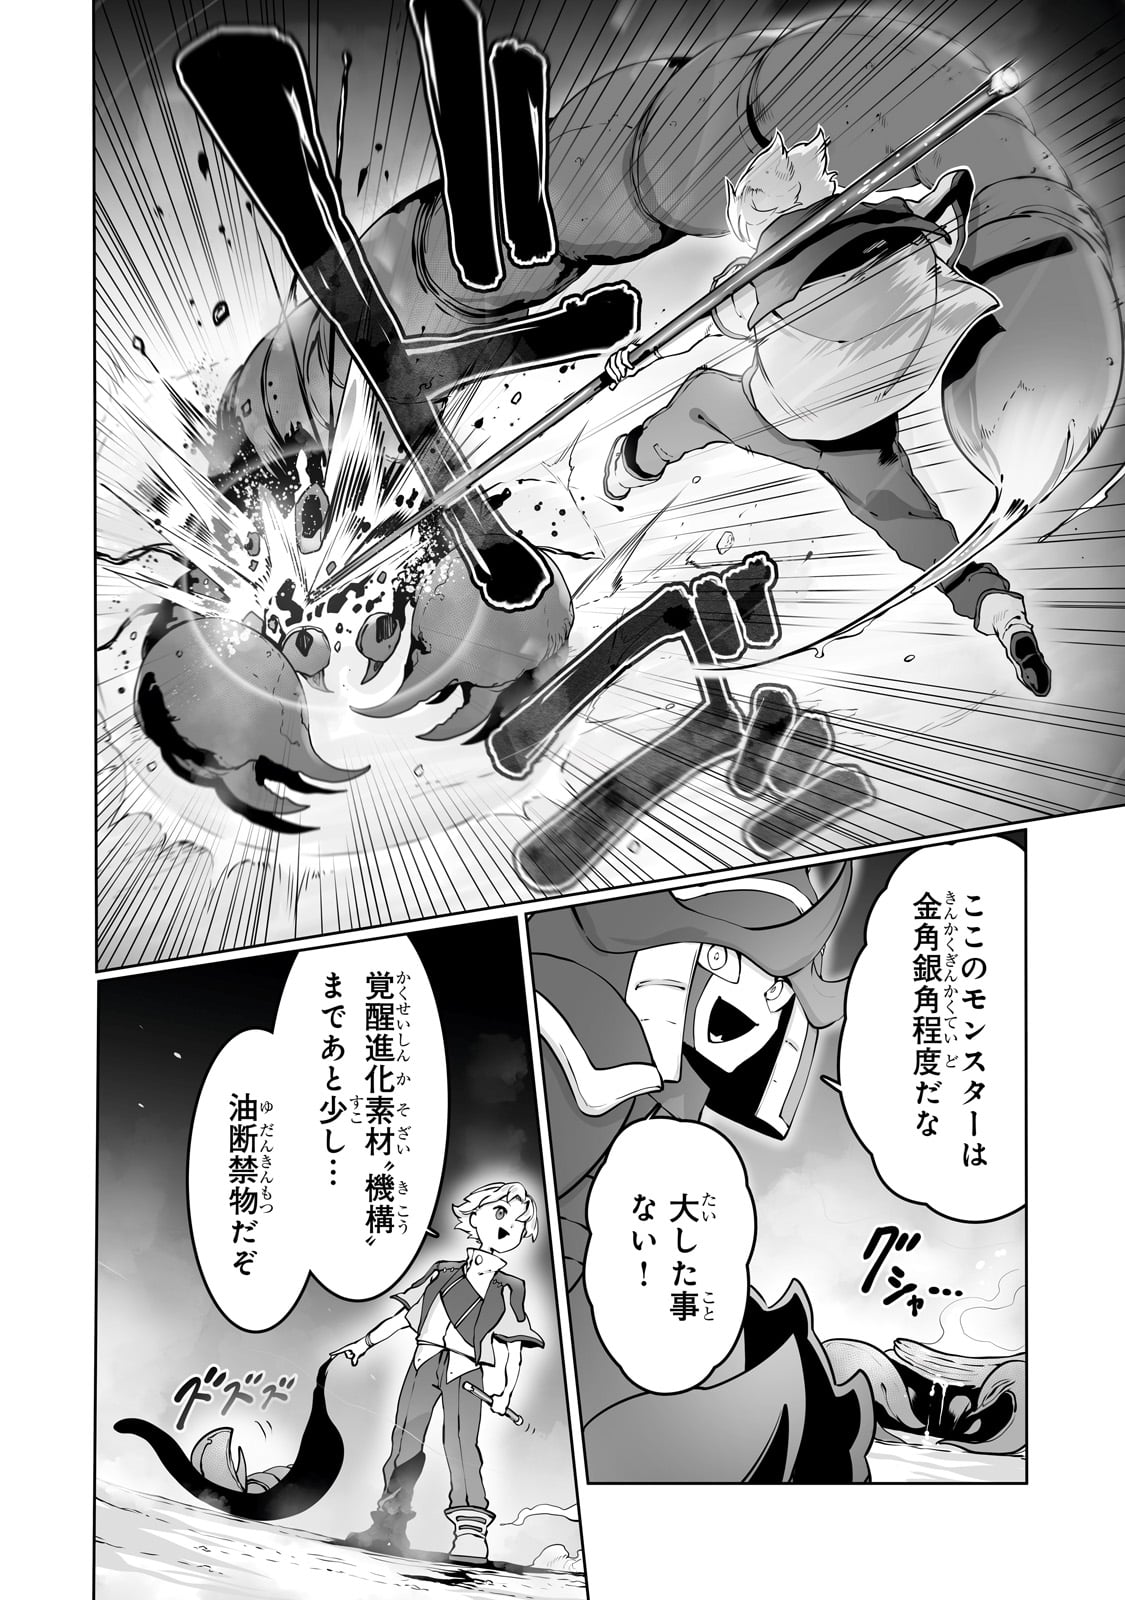 The Useless Tamer Will Turn Into the Top Unconsciously by My Previous Life Knowledge - Chapter 37 - Page 2